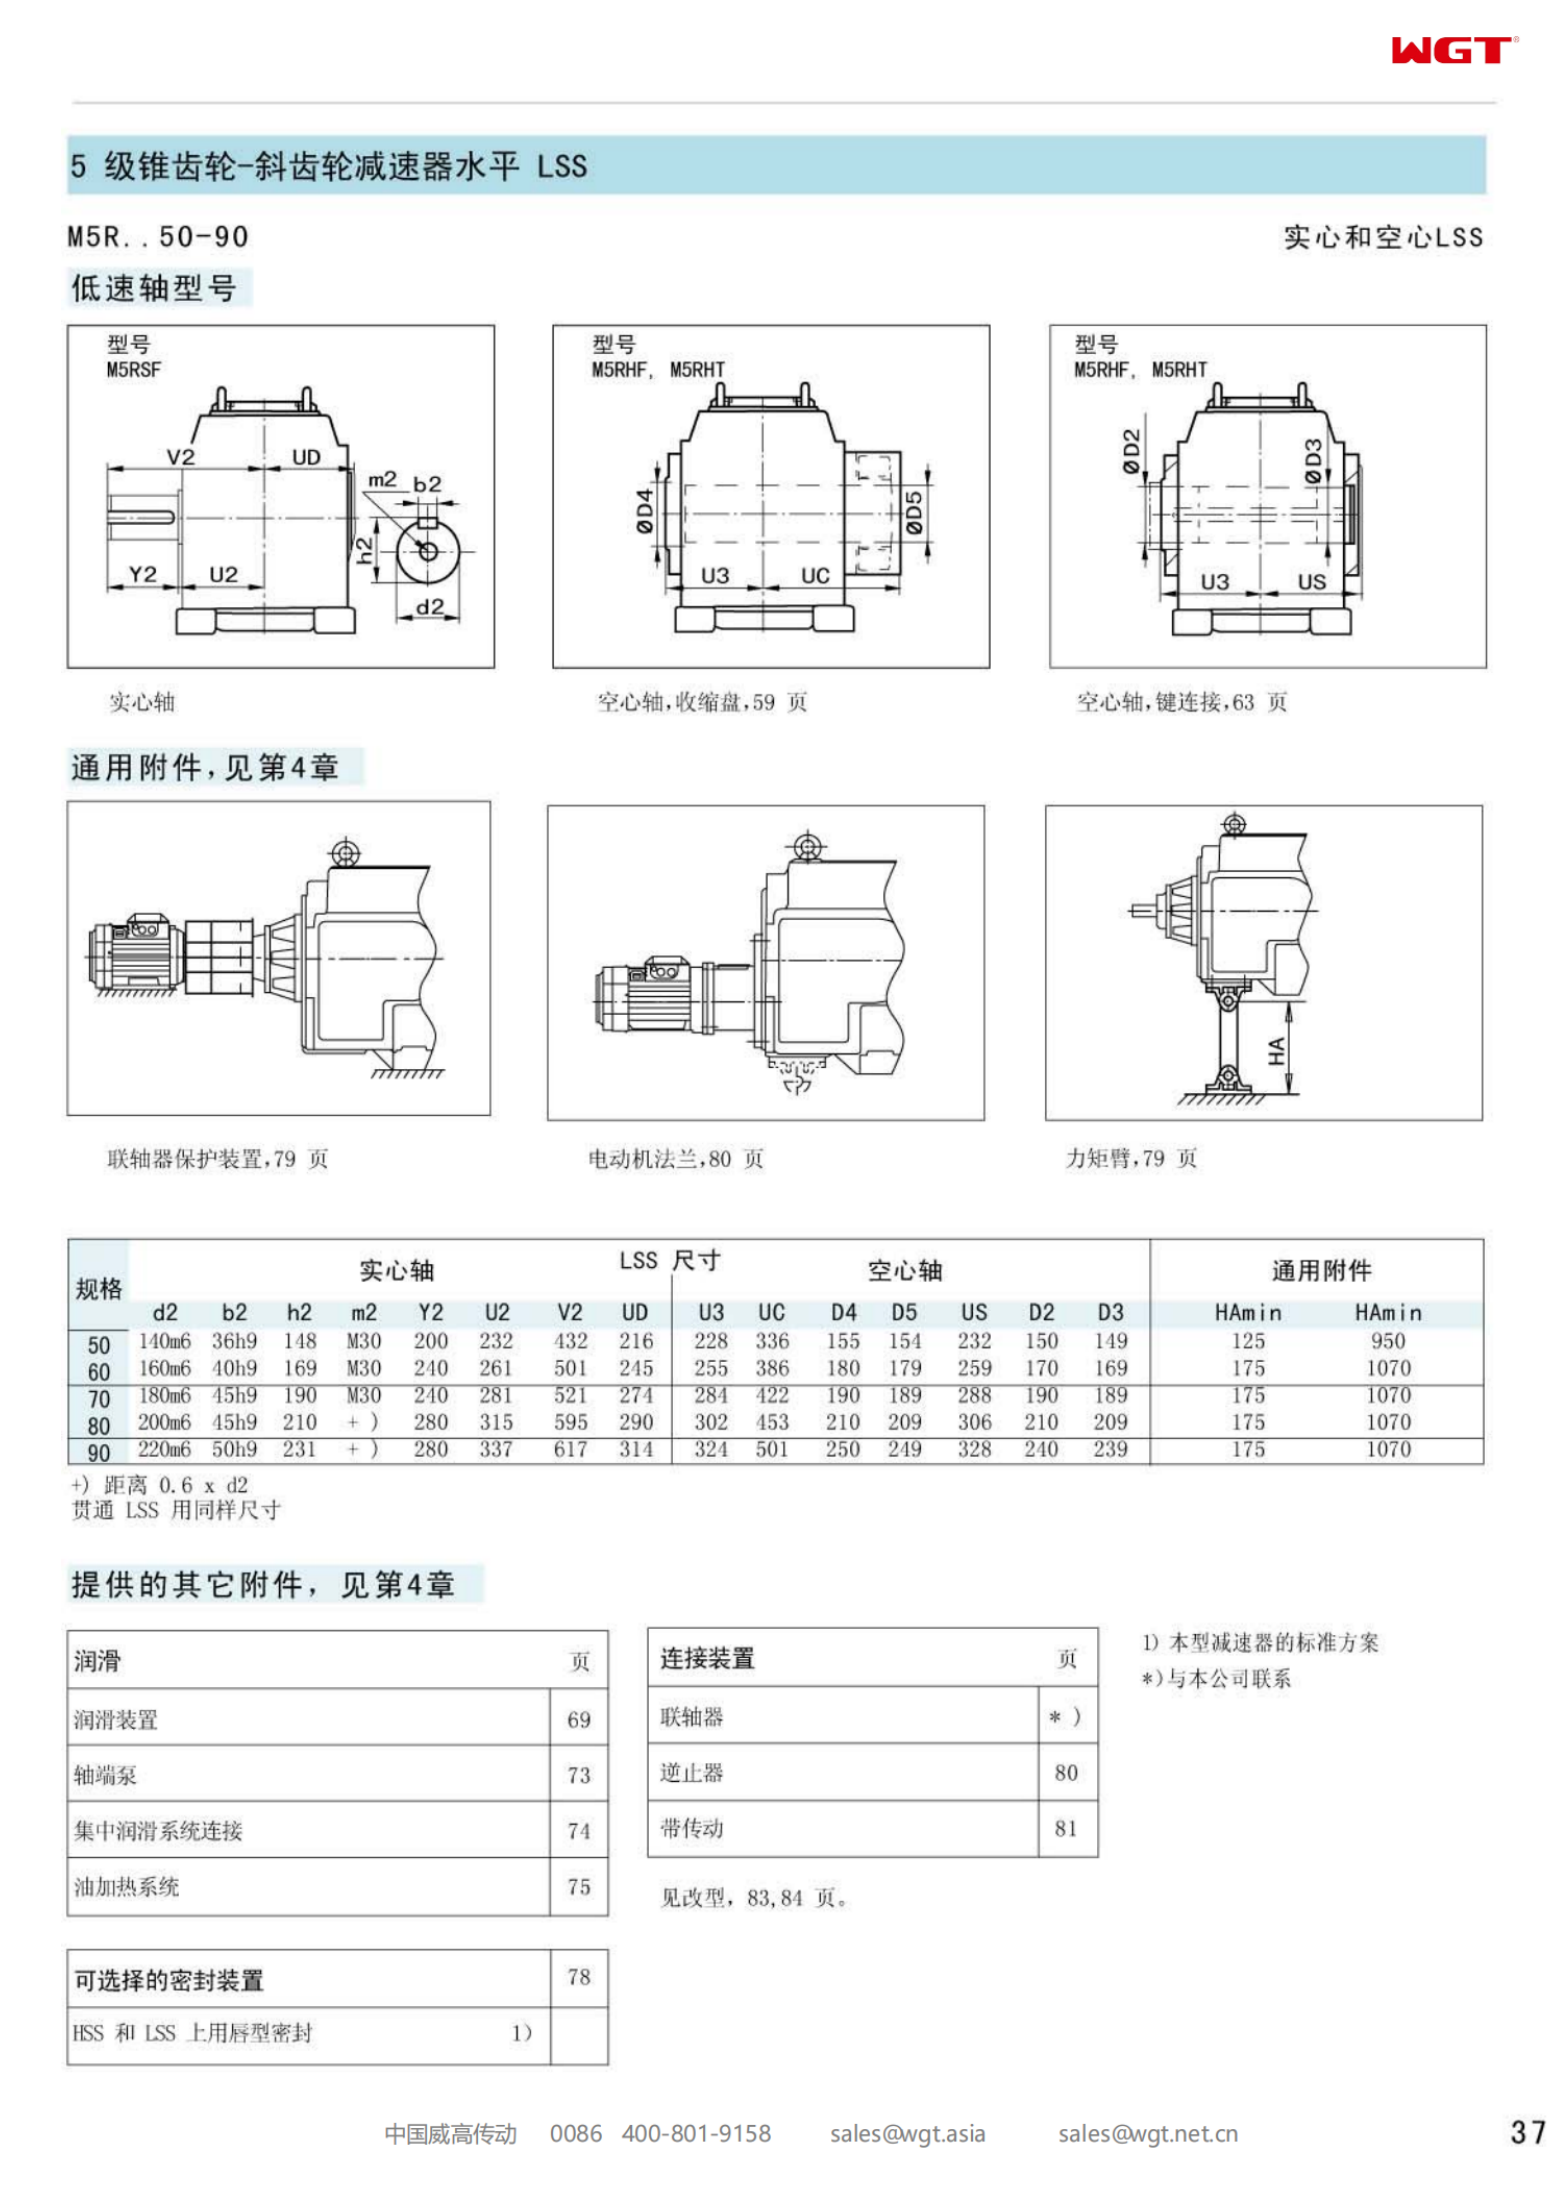 M2PVHF10 Replace_SEW_M_Series Gearbox